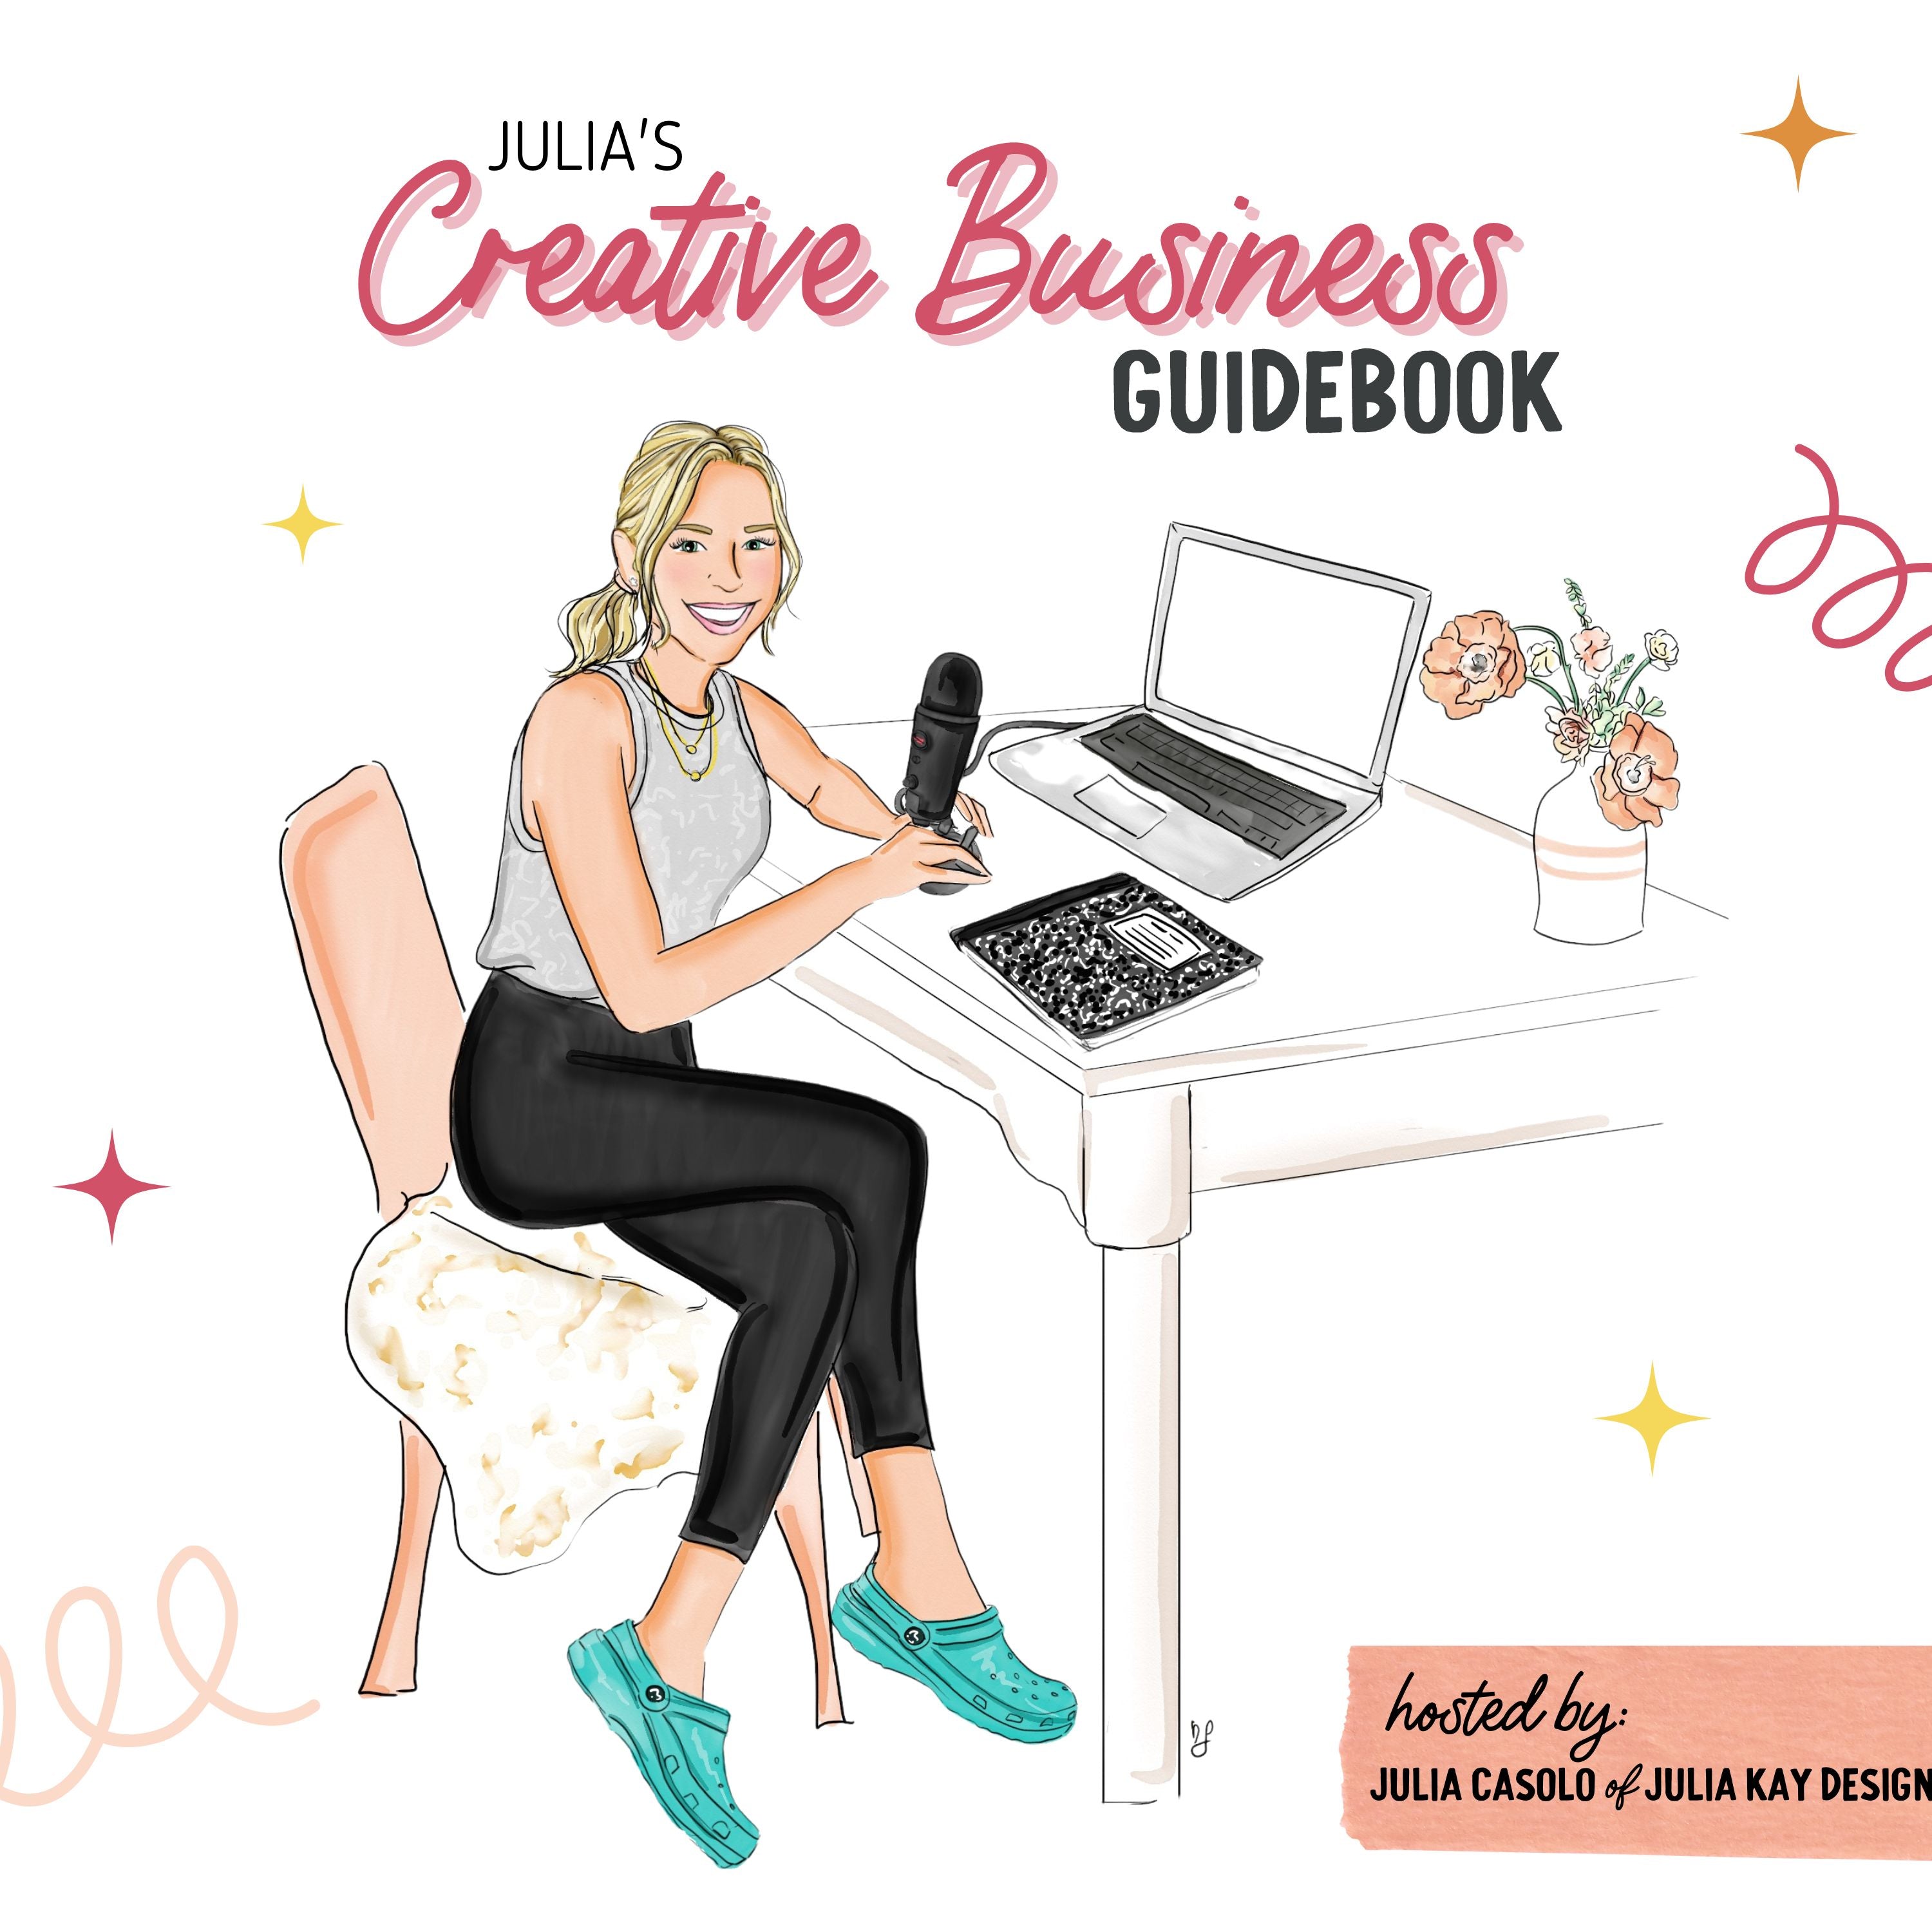 Episode 1: Introduction to Julia's Creative Business Guidebook